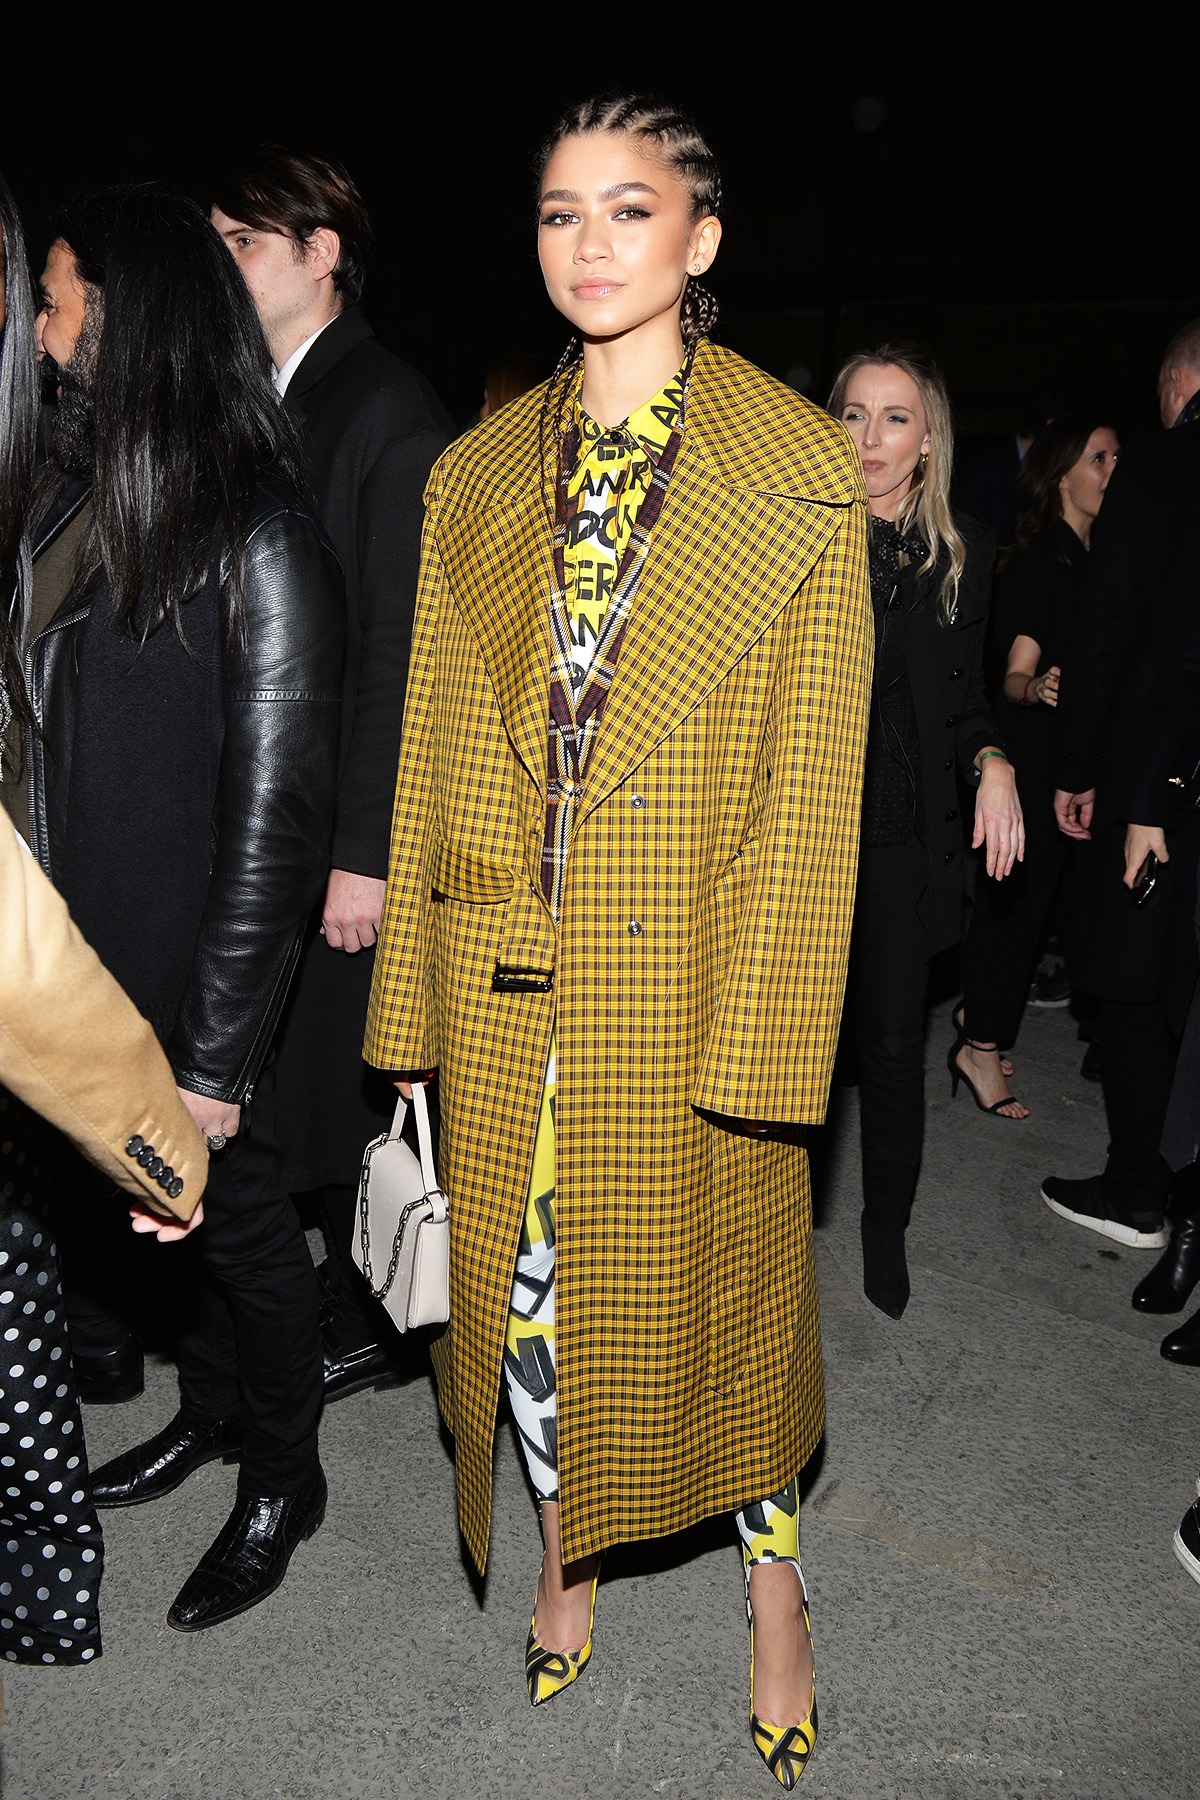 The Best Celebrity Looks From London Fashion Week | Who What Wear